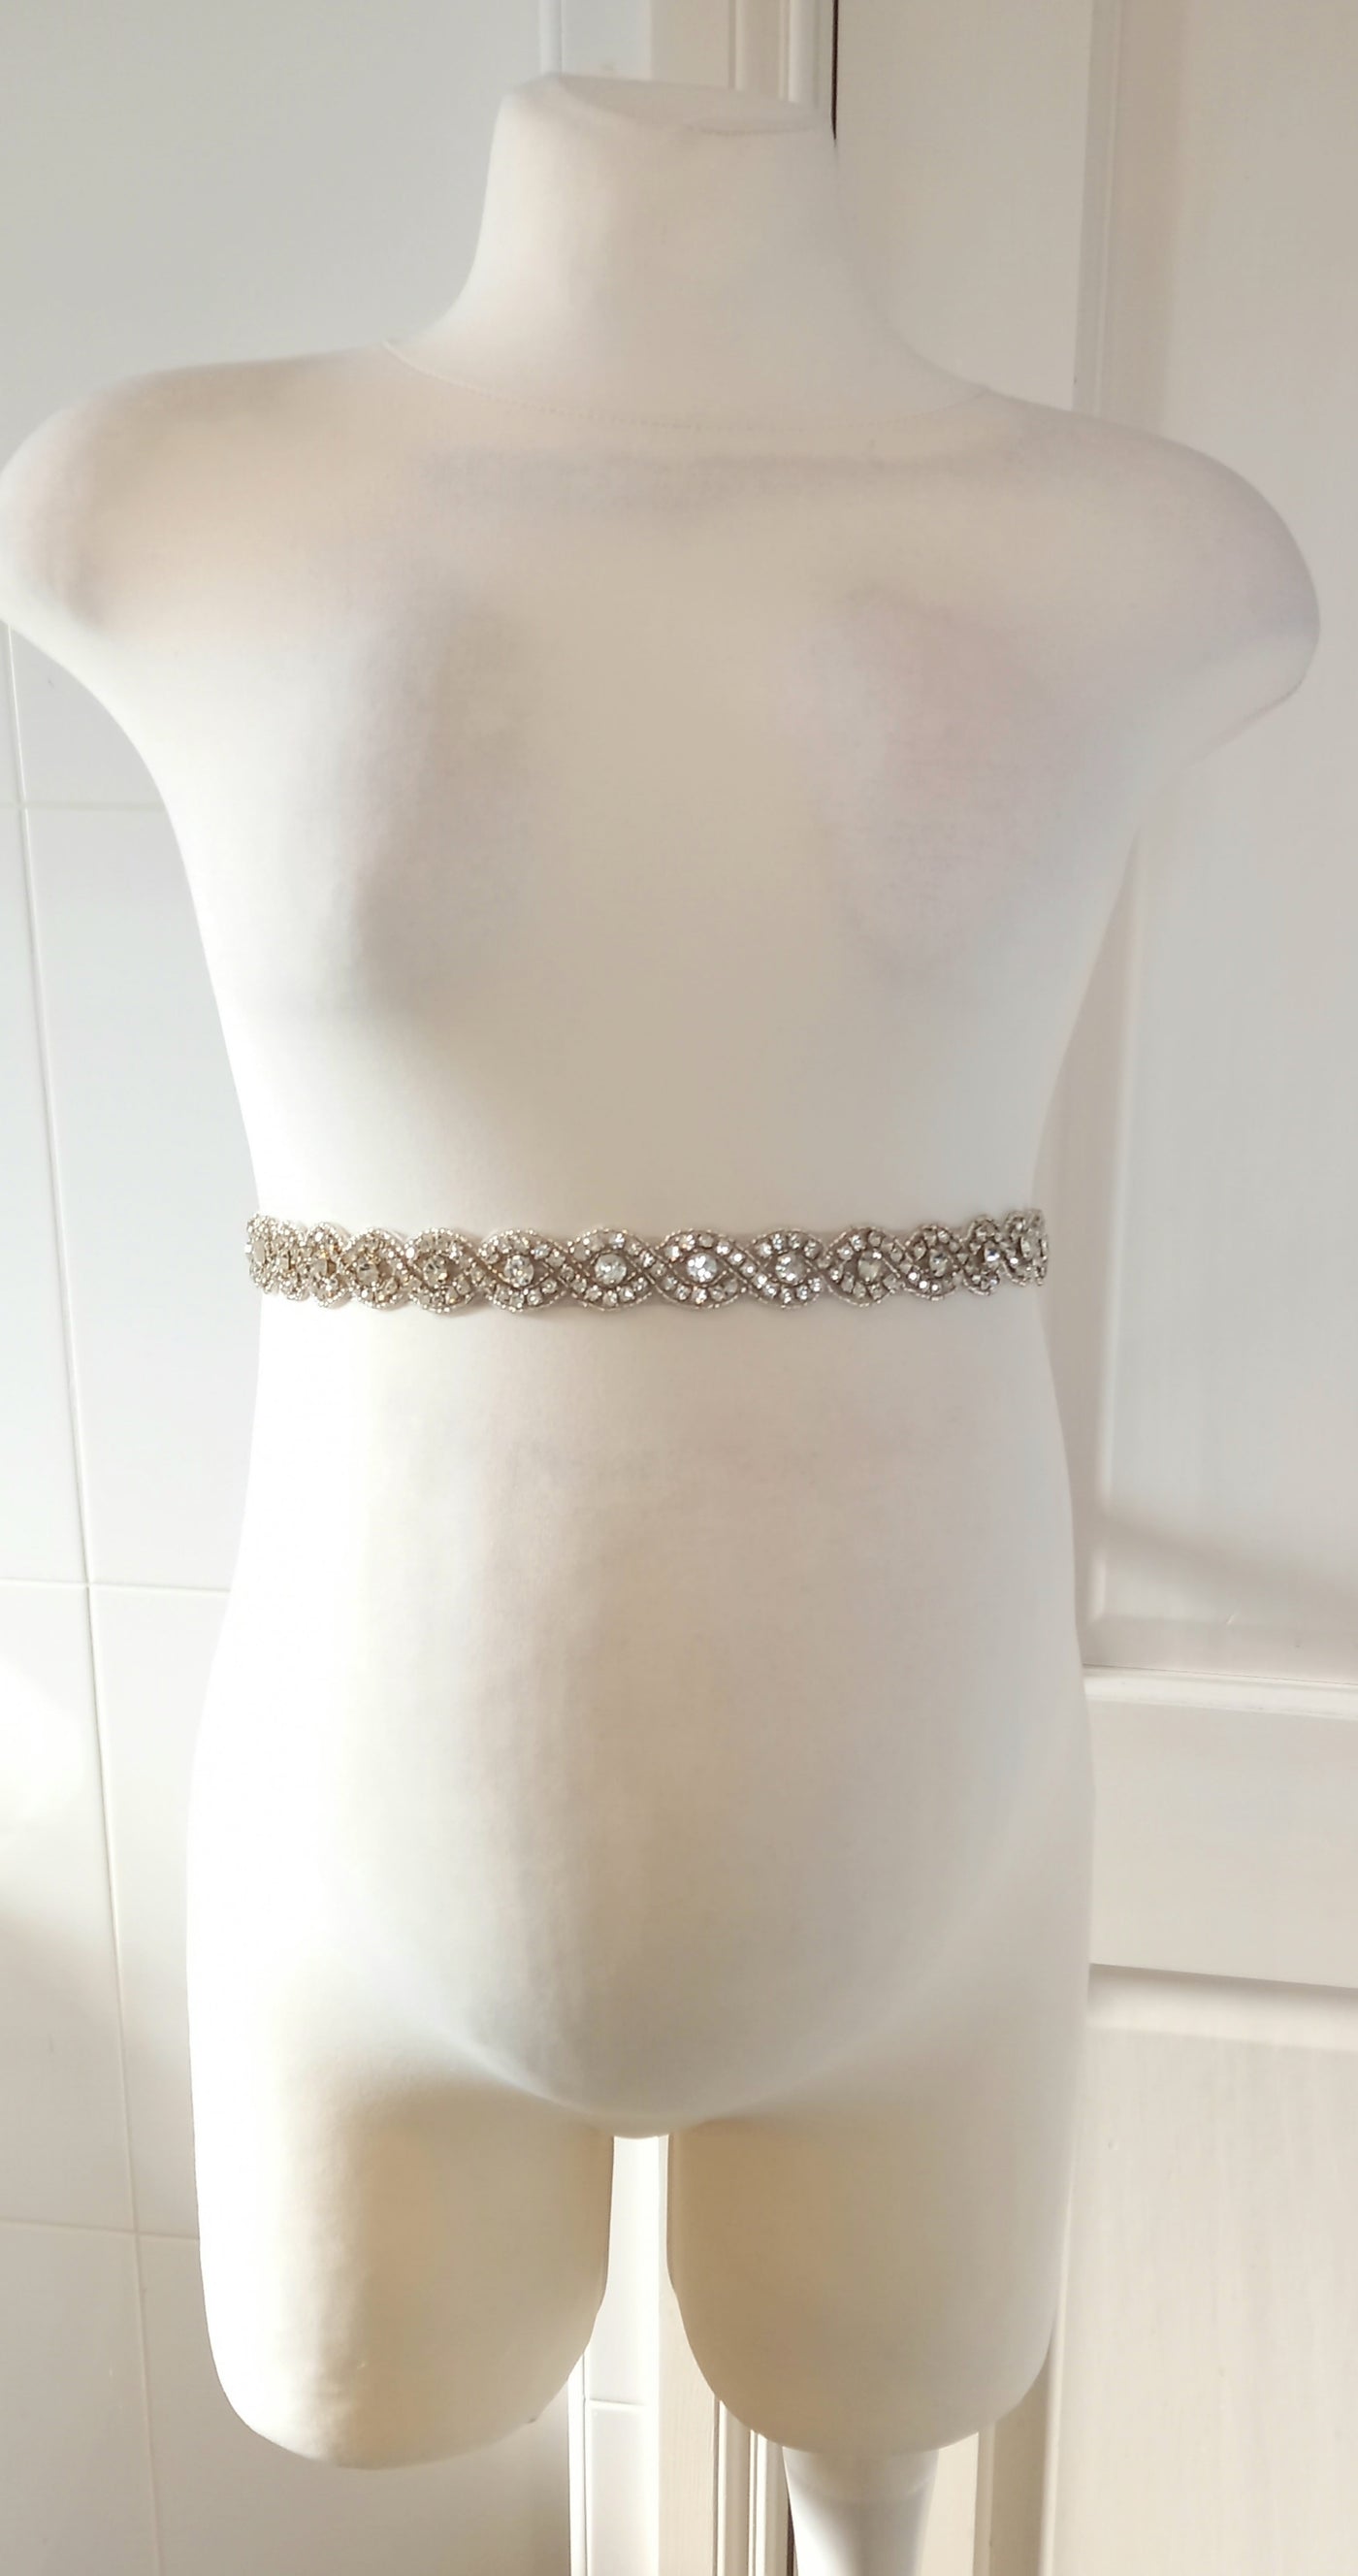 Diamante Belt with Silver Satin Ribbon - One Size